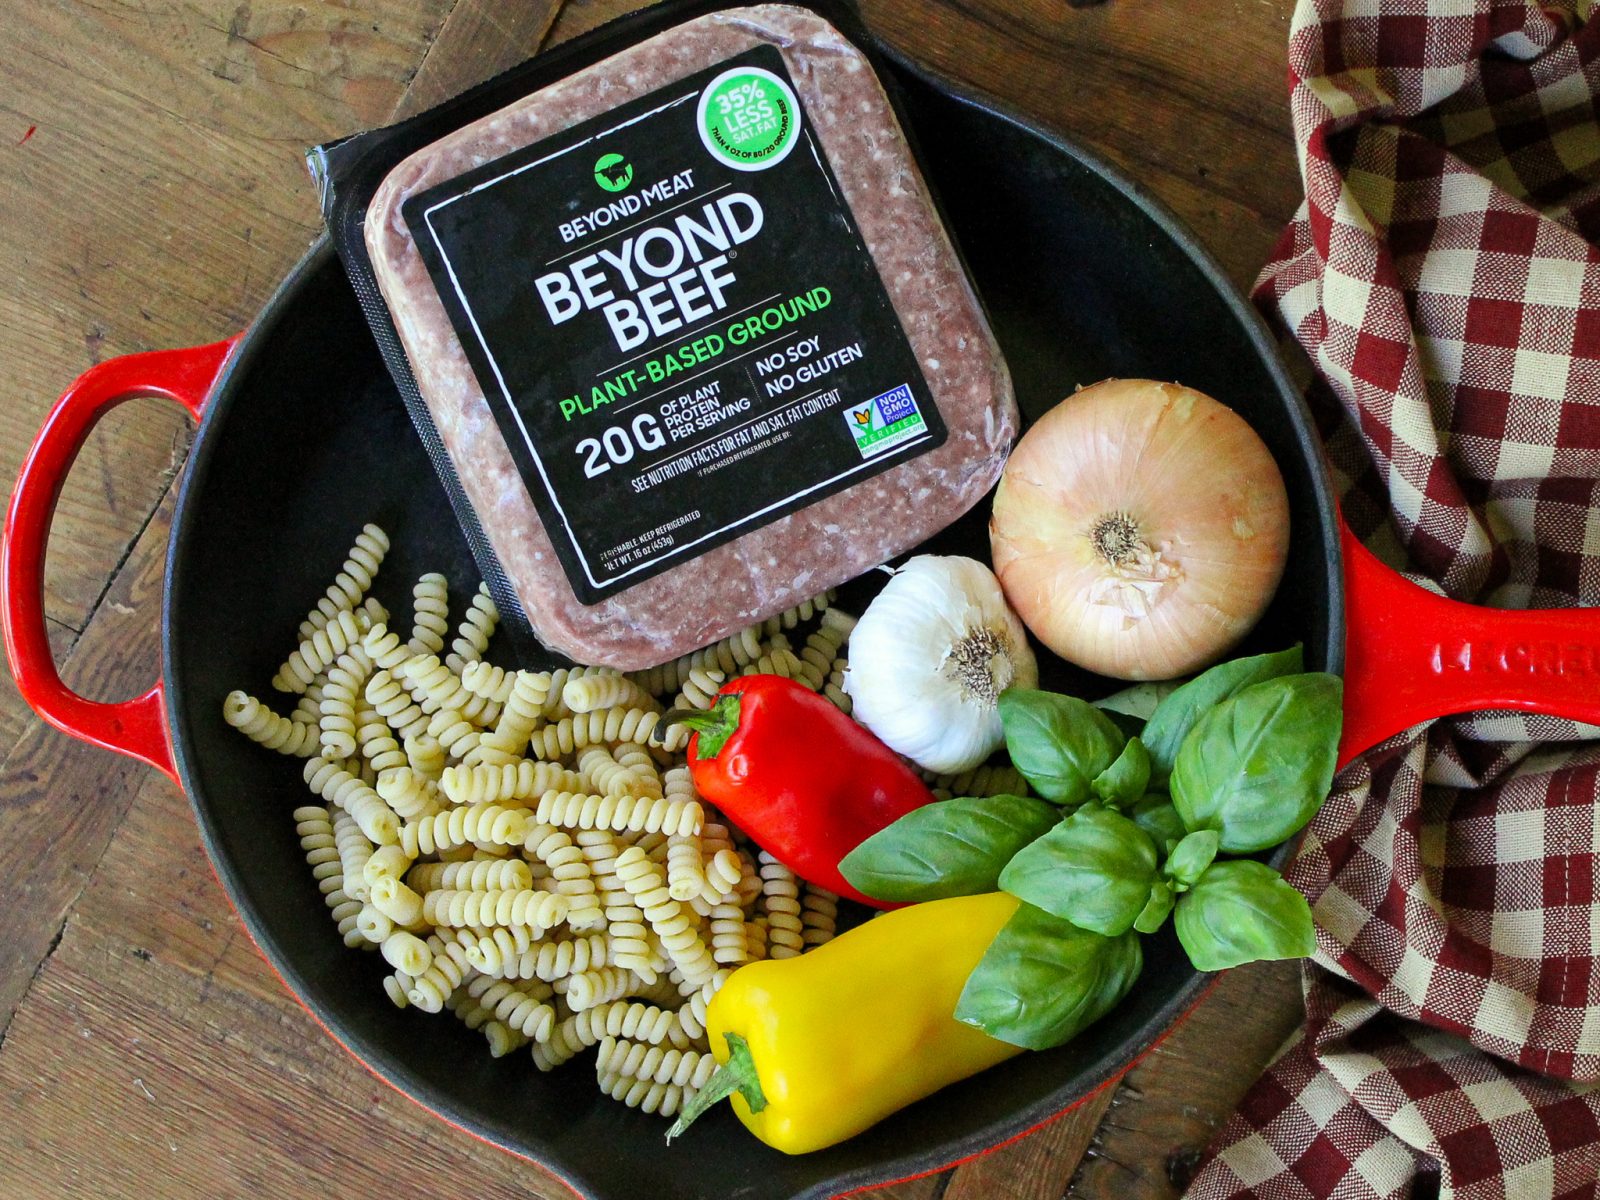 Beyond Meat Beyond Beef As Low As $4 At Publix on I Heart Publix 1